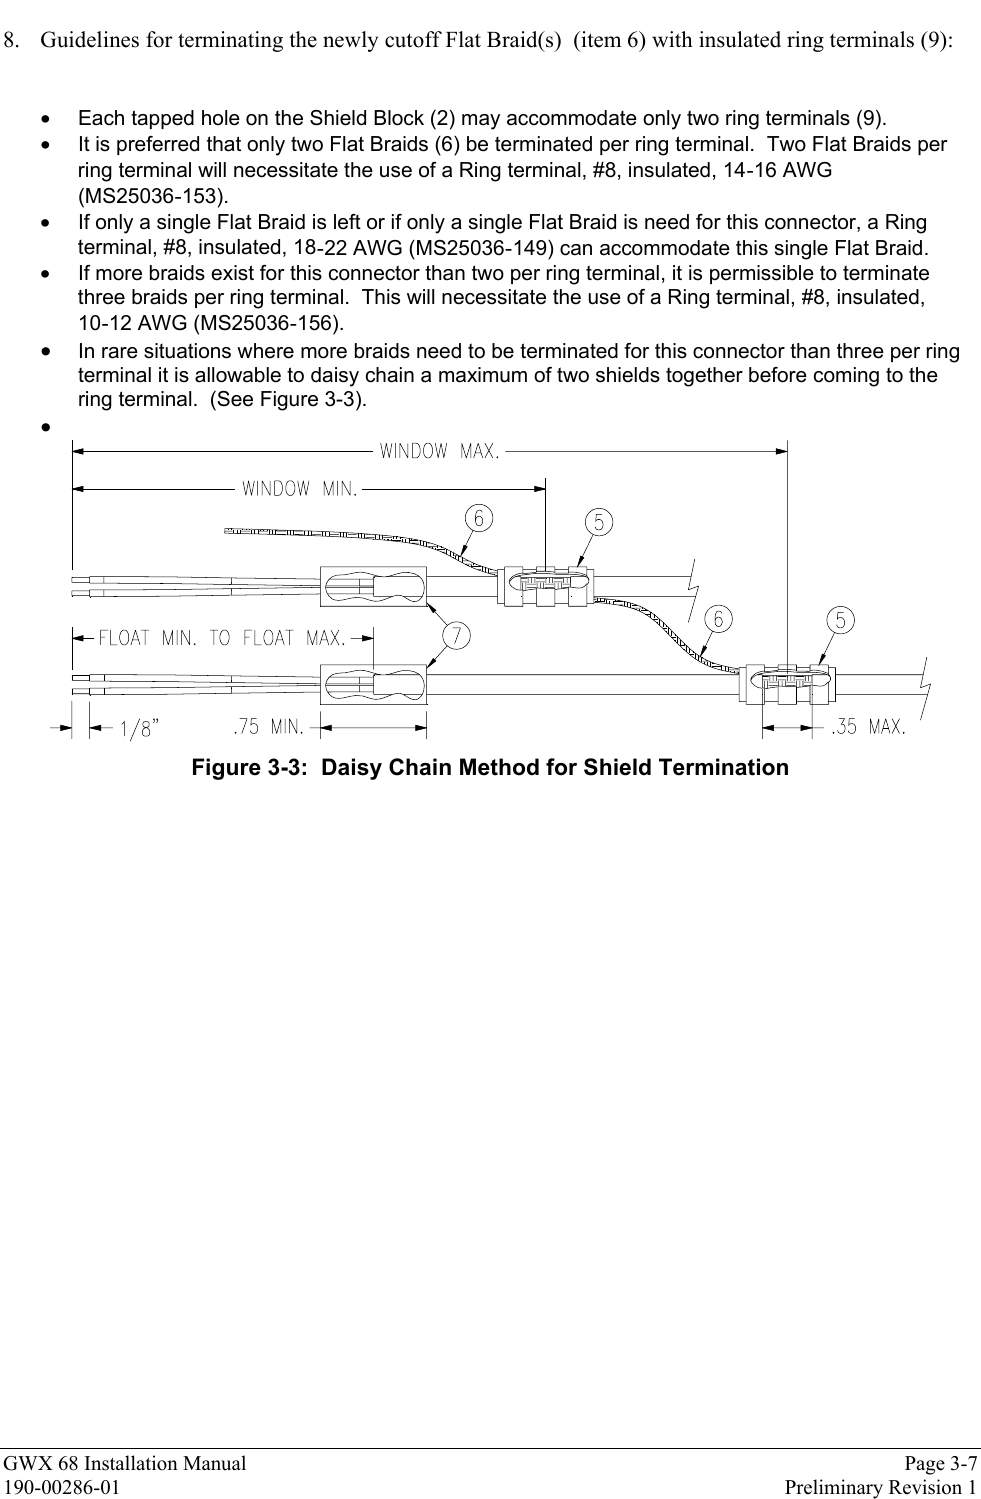 GWX 68 Installation Manual Page 3-7190-00286-01 Preliminary Revision 18. Guidelines for terminating the newly cutoff Flat Braid(s)  (item 6) with insulated ring terminals (9):•  Each tapped hole on the Shield Block (2) may accommodate only two ring terminals (9).•  It is preferred that only two Flat Braids (6) be terminated per ring terminal.  Two Flat Braids perring terminal will necessitate the use of a Ring terminal, #8, insulated, 14-16 AWG(MS25036-153).•  If only a single Flat Braid is left or if only a single Flat Braid is need for this connector, a Ringterminal, #8, insulated, 18-22 AWG (MS25036-149) can accommodate this single Flat Braid.•  If more braids exist for this connector than two per ring terminal, it is permissible to terminatethree braids per ring terminal.  This will necessitate the use of a Ring terminal, #8, insulated,10-12 AWG (MS25036-156).• In rare situations where more braids need to be terminated for this connector than three per ringterminal it is allowable to daisy chain a maximum of two shields together before coming to thering terminal.  (See Figure 3-3).• Figure 3-3:  Daisy Chain Method for Shield Termination